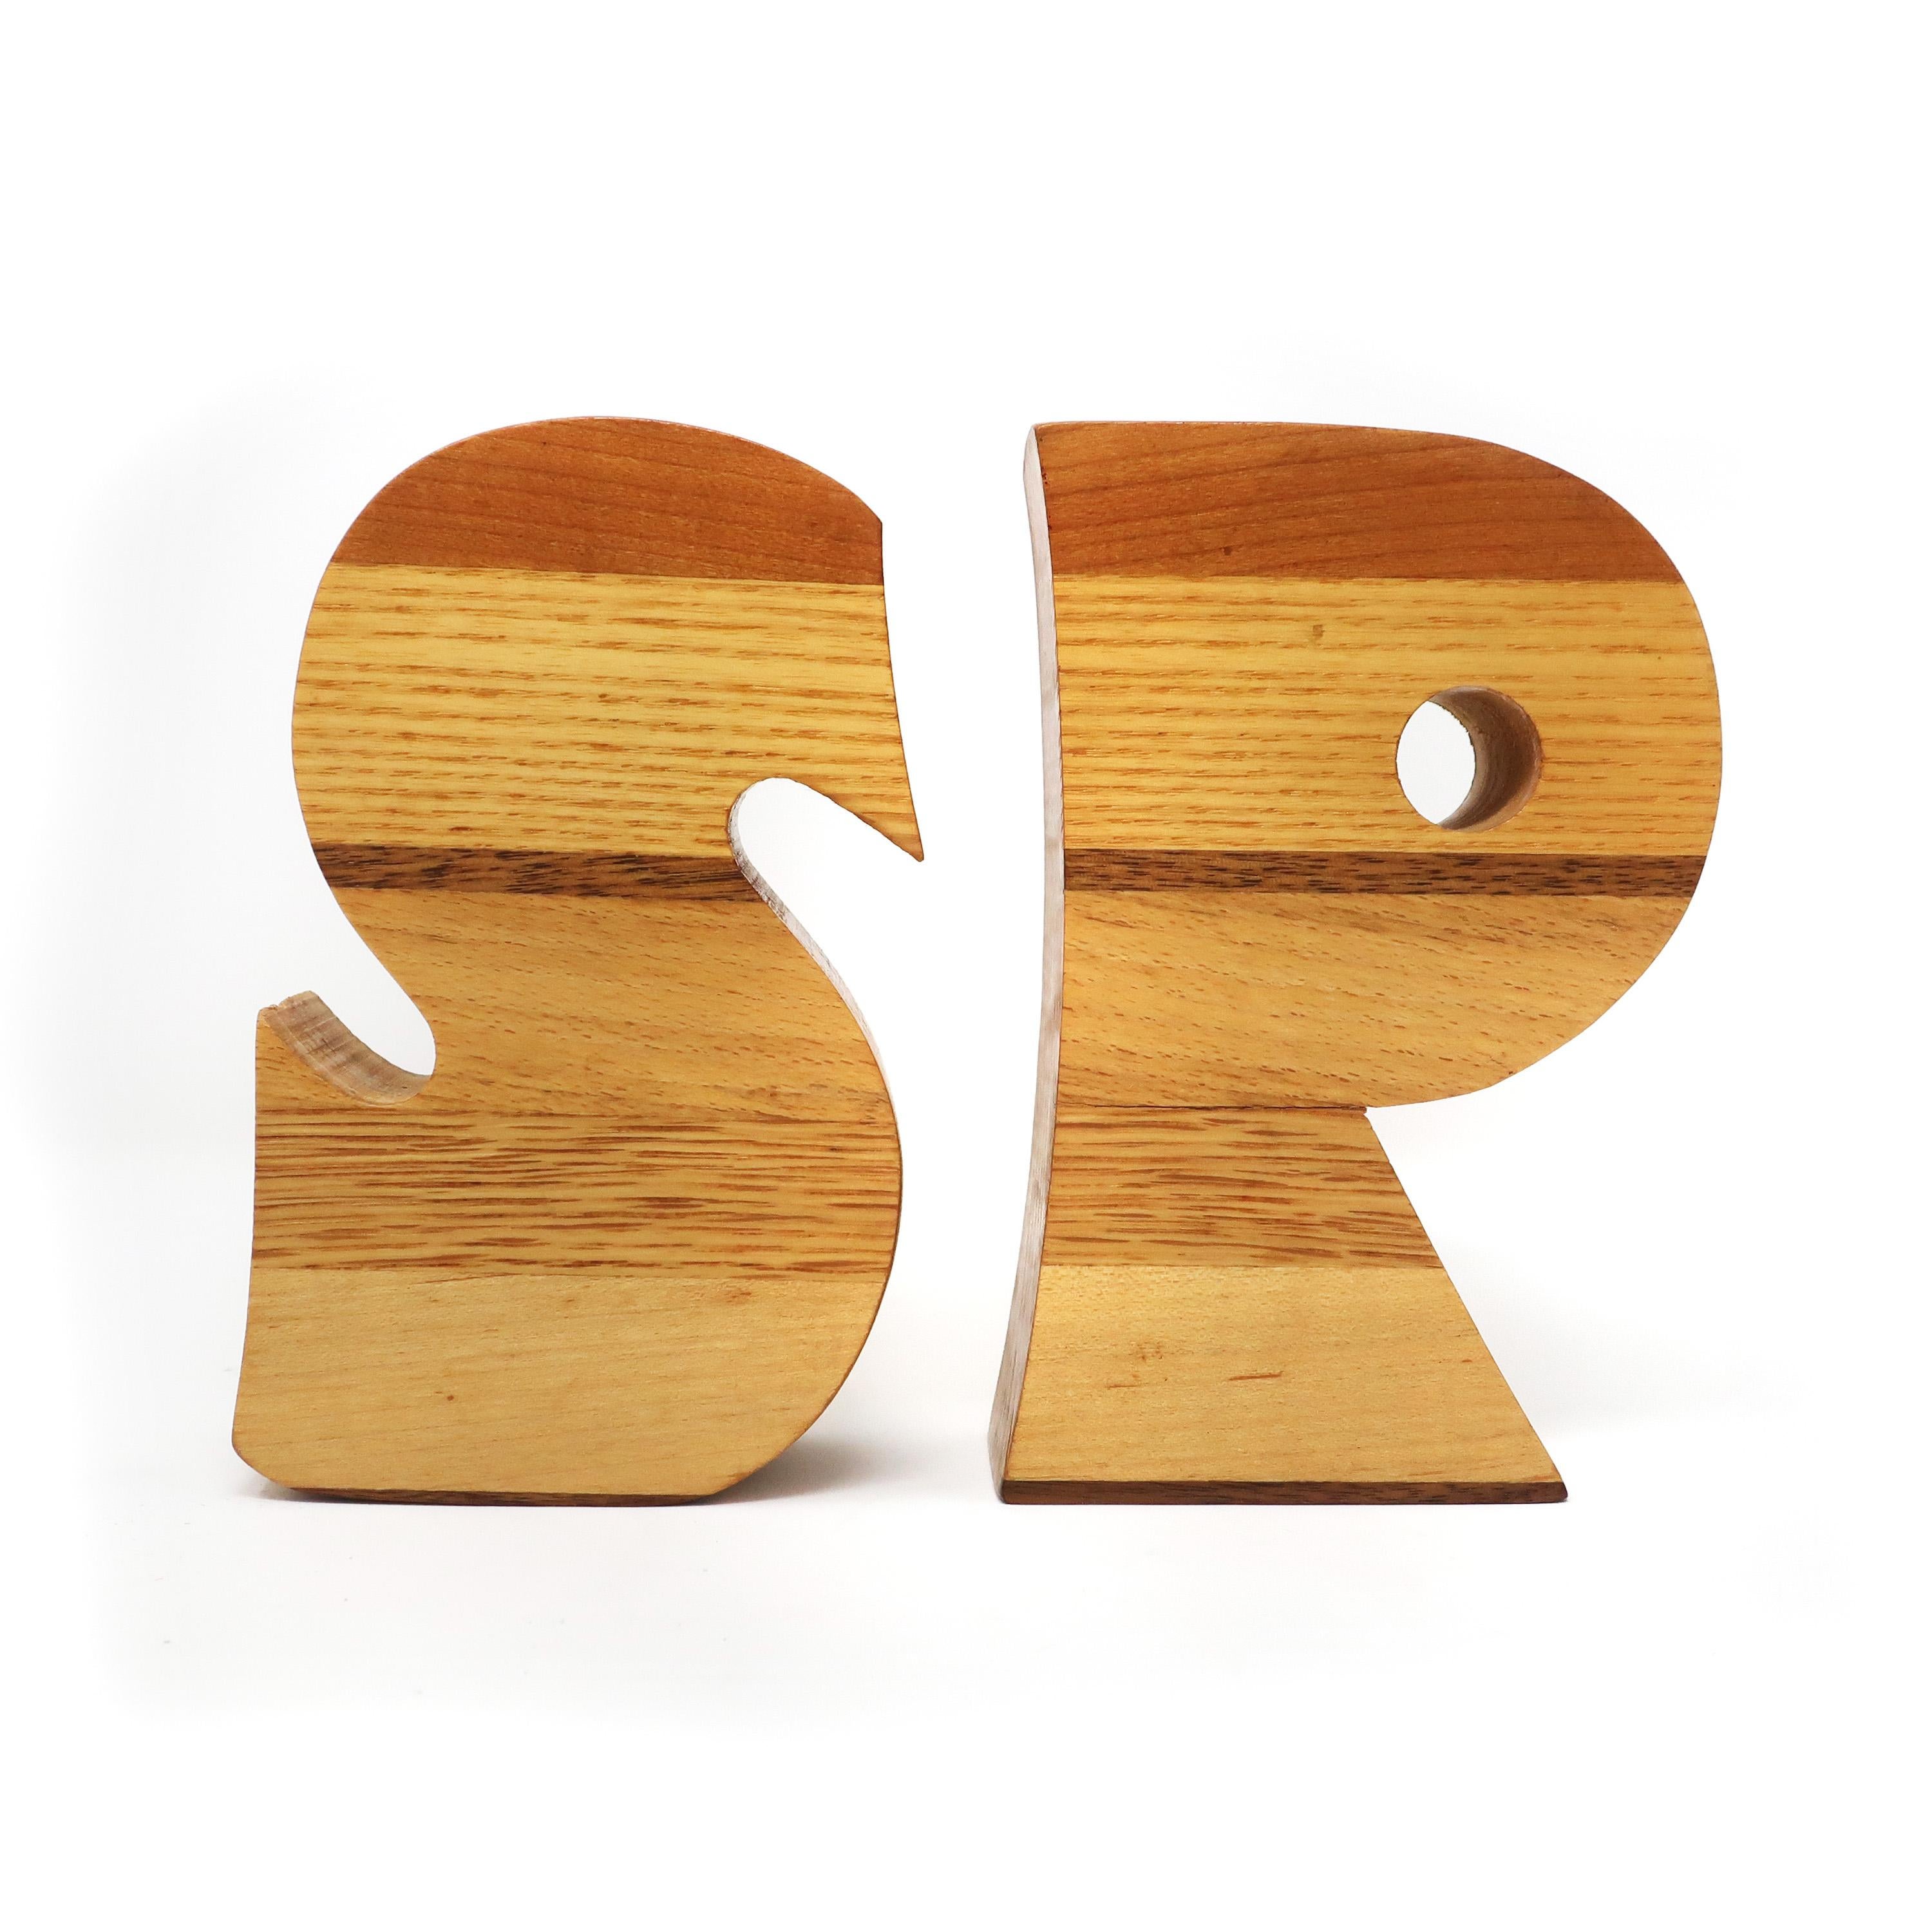 A set of vintage Mid-Century Modern wood salt and pepper shakers in the shape of an “S” and a “P”. Almost six inches tall and made of brightly figured wood with contrasting darker stripes. These scream 1970s! Very well constructed with new cork